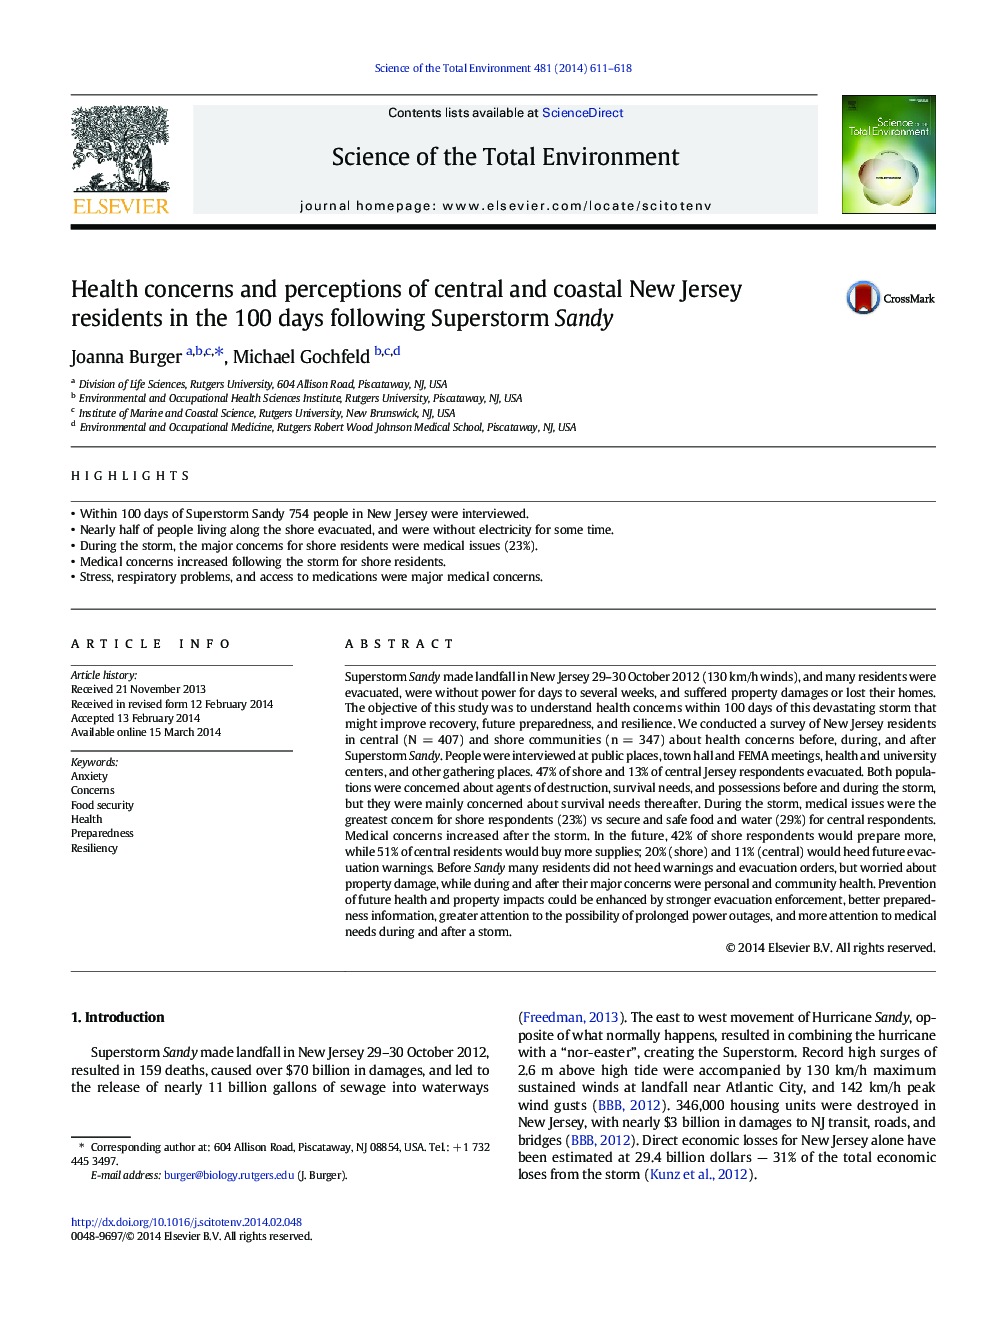 Health concerns and perceptions of central and coastal New Jersey residents in the 100Â days following Superstorm Sandy